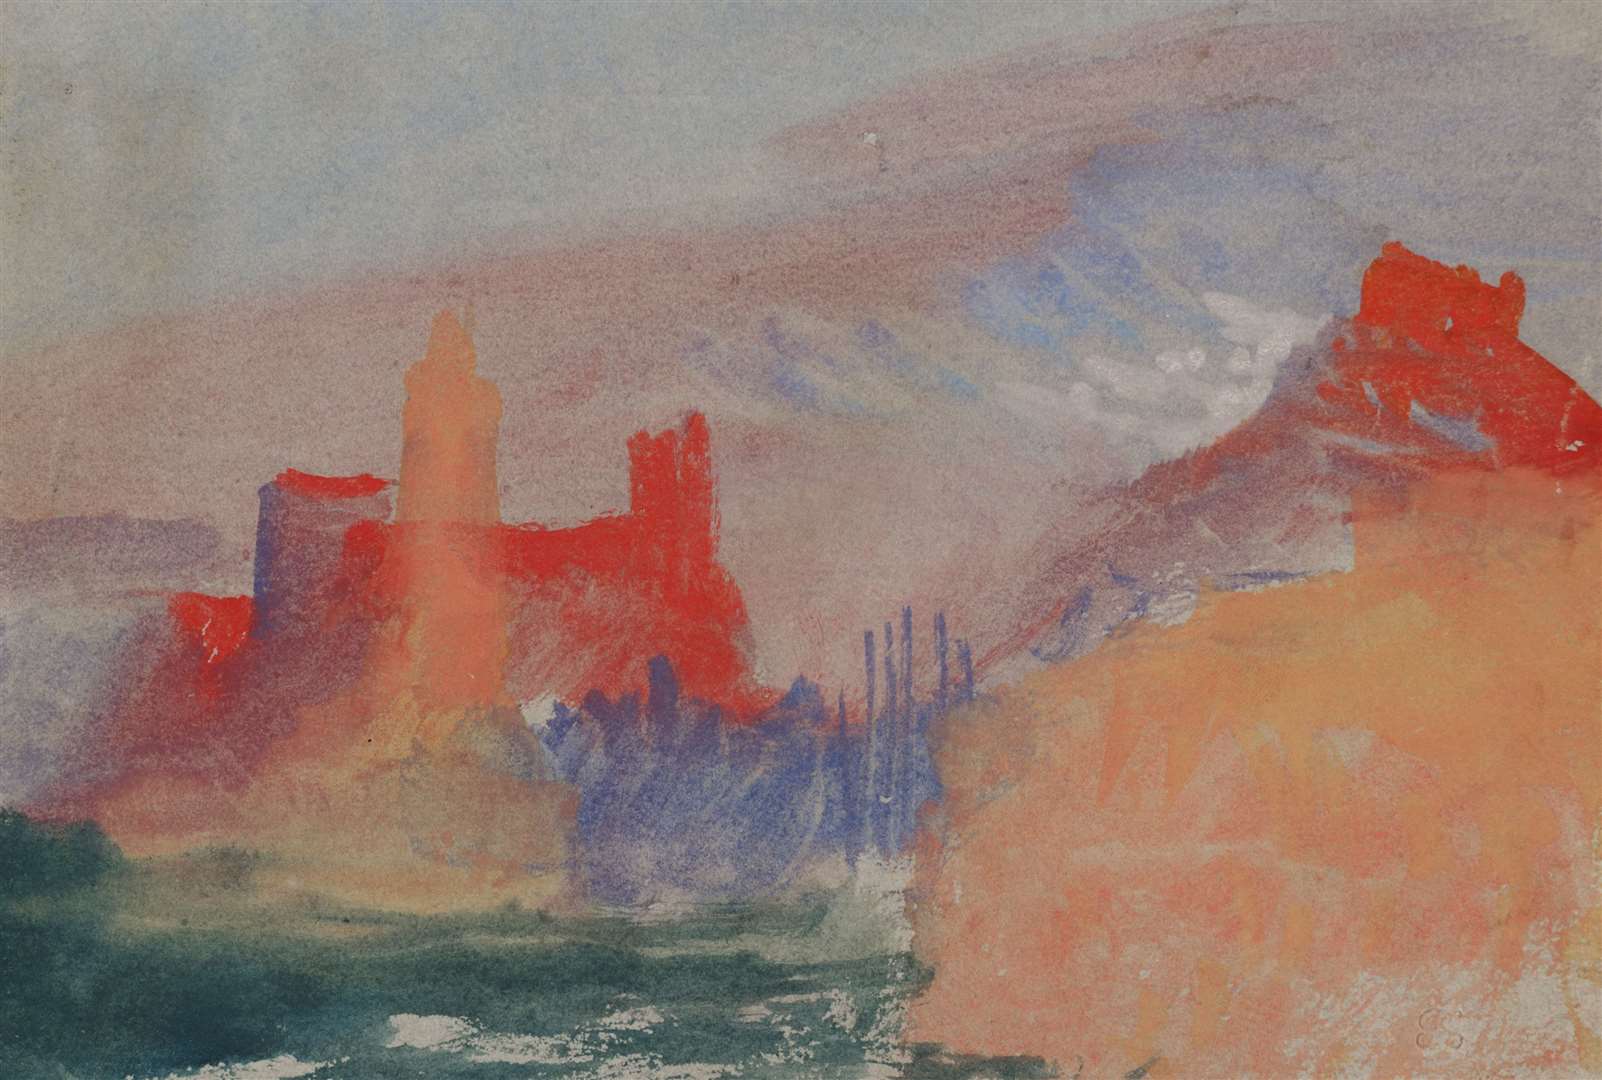 Vermilion Towers by artist JMW Turner who the gallery and prize are named after